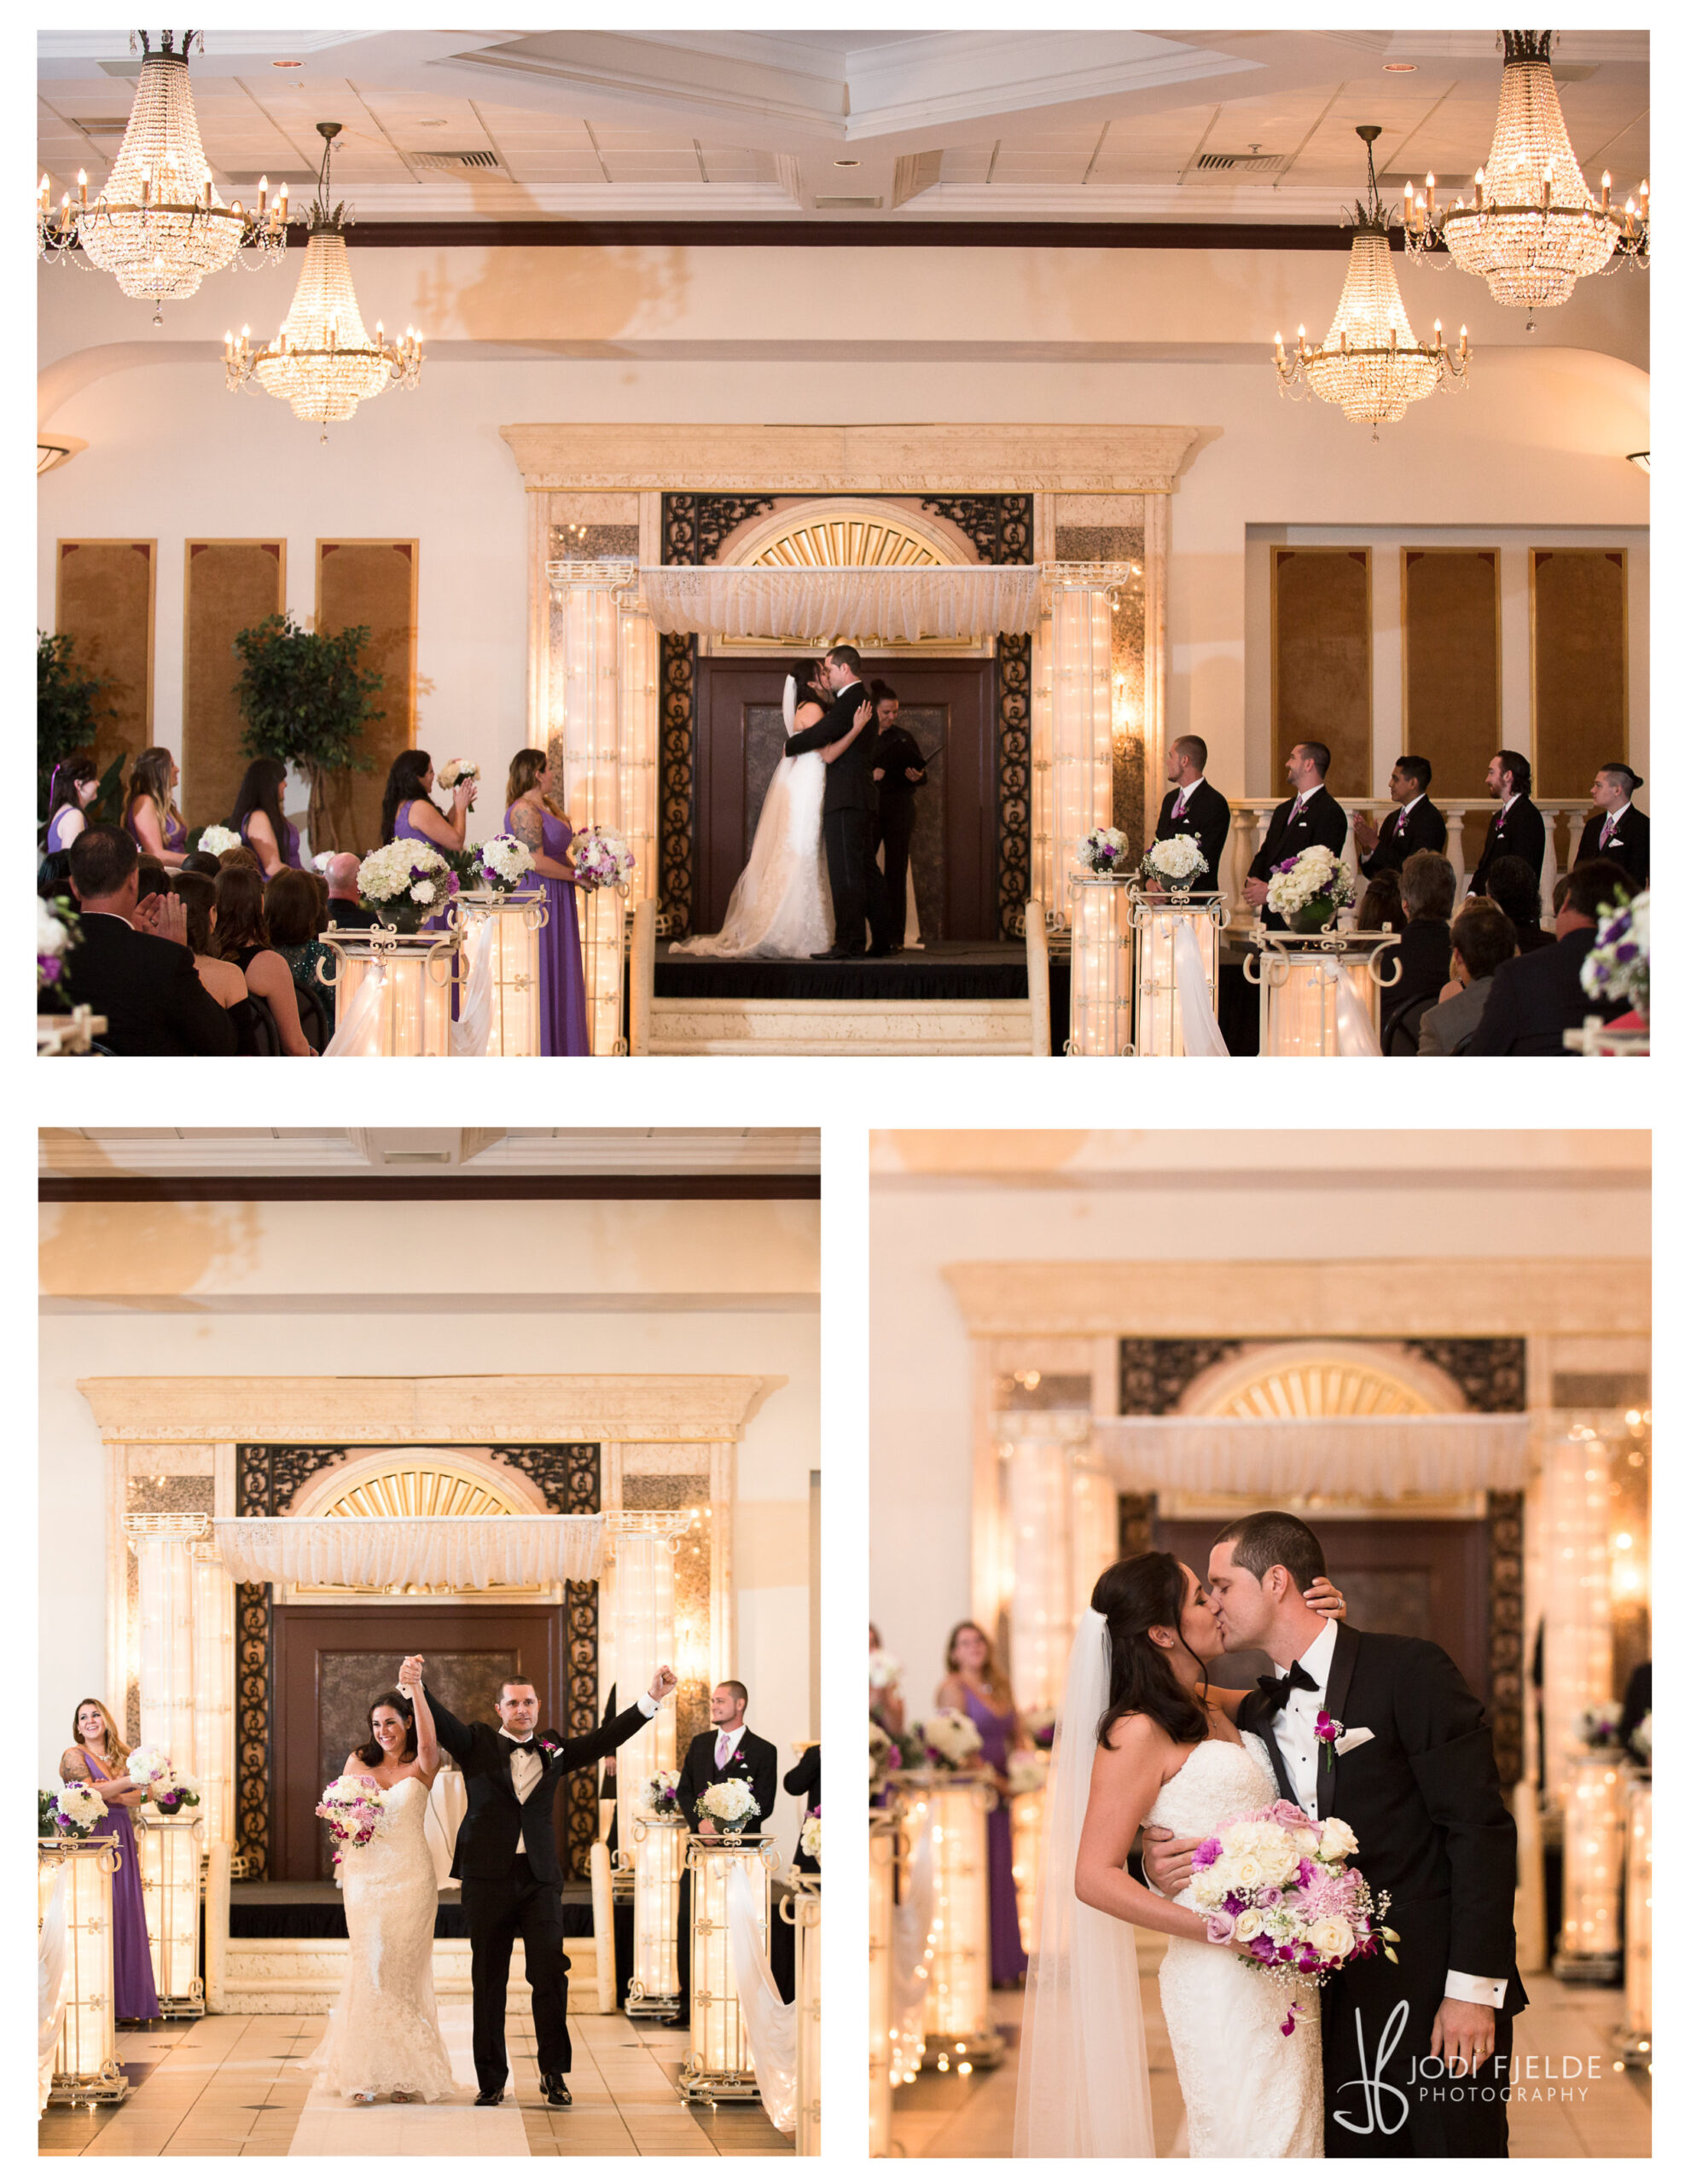 Fort-Lauderdale-Signature-grand-wedding-Paola-and-Max-married-19.jpg